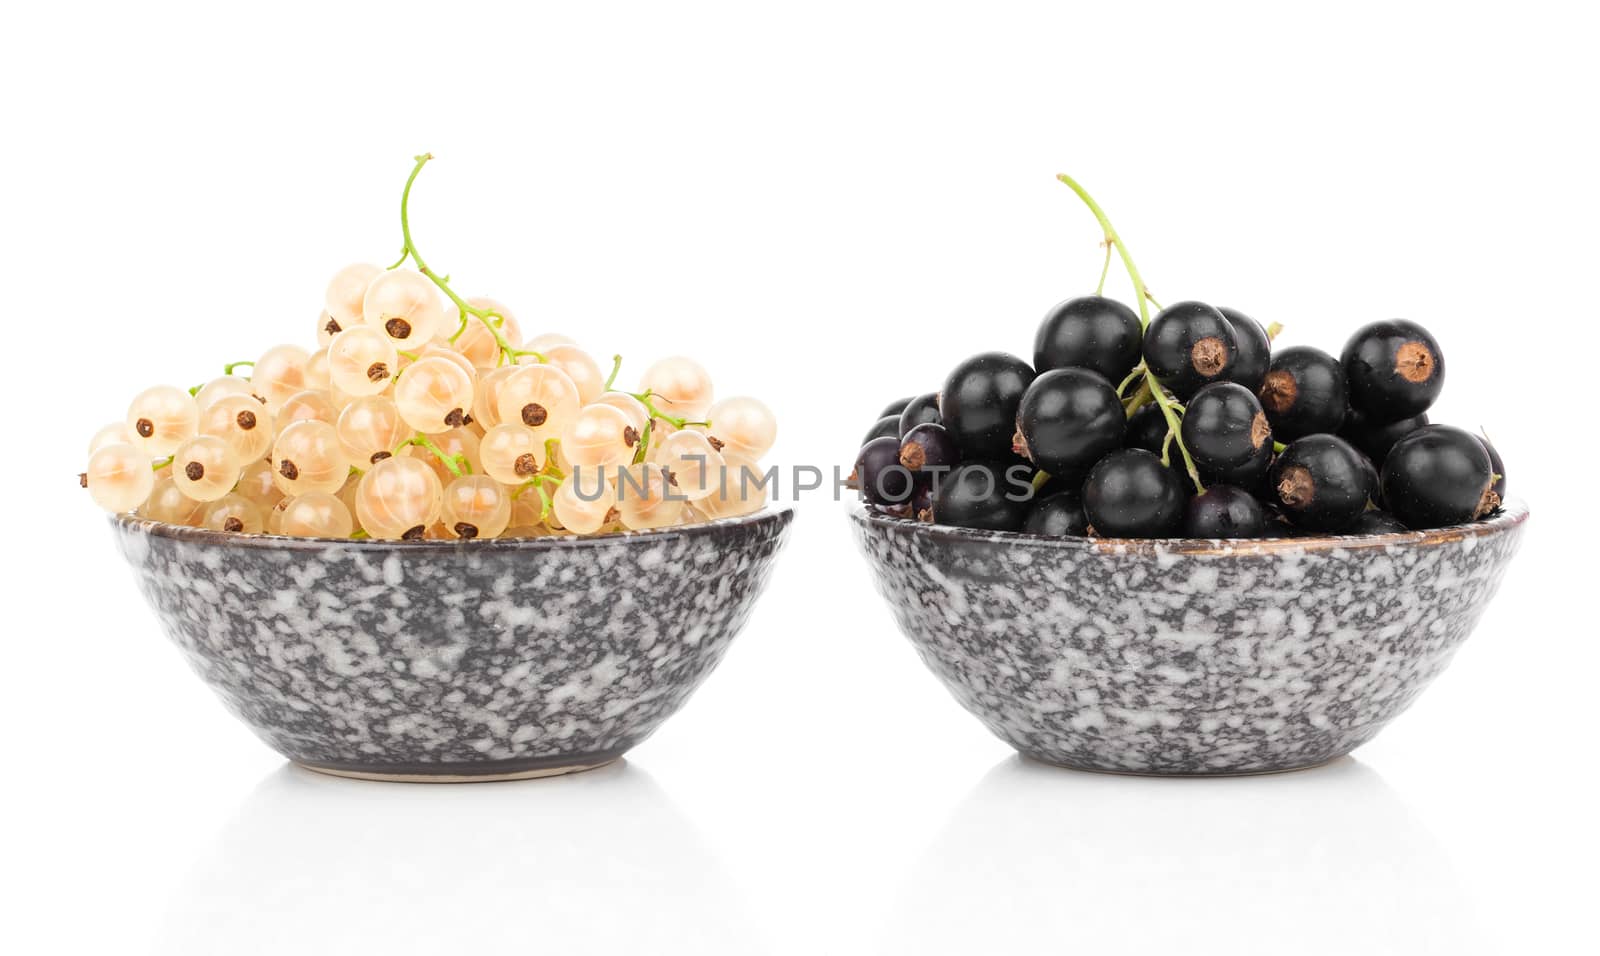 white and black currant in a bowl, on a white background